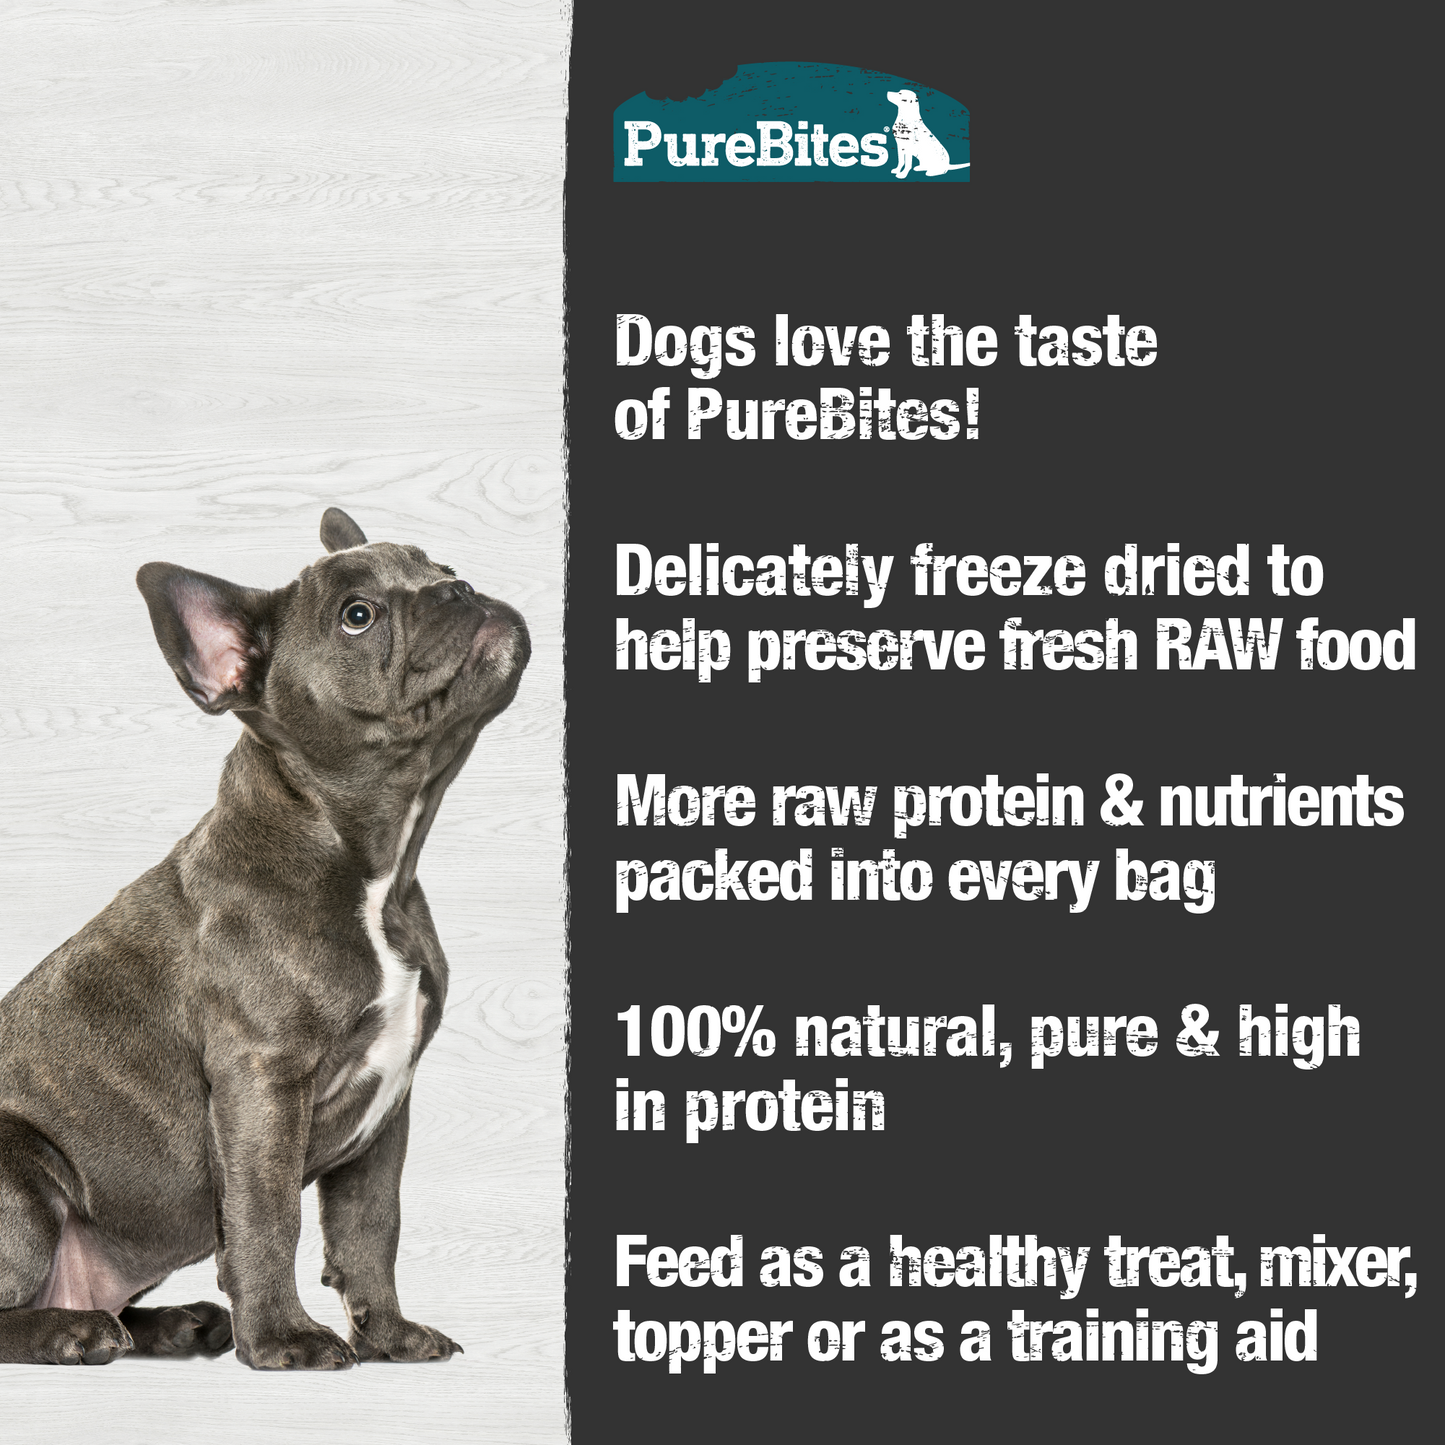 Made fresh & pure means more RAW protein and nutrients packed into every bag. Our beef & cheese is freeze dried to help preserve its RAW taste, and nutrition, and mirror a dog’s ancestral diet